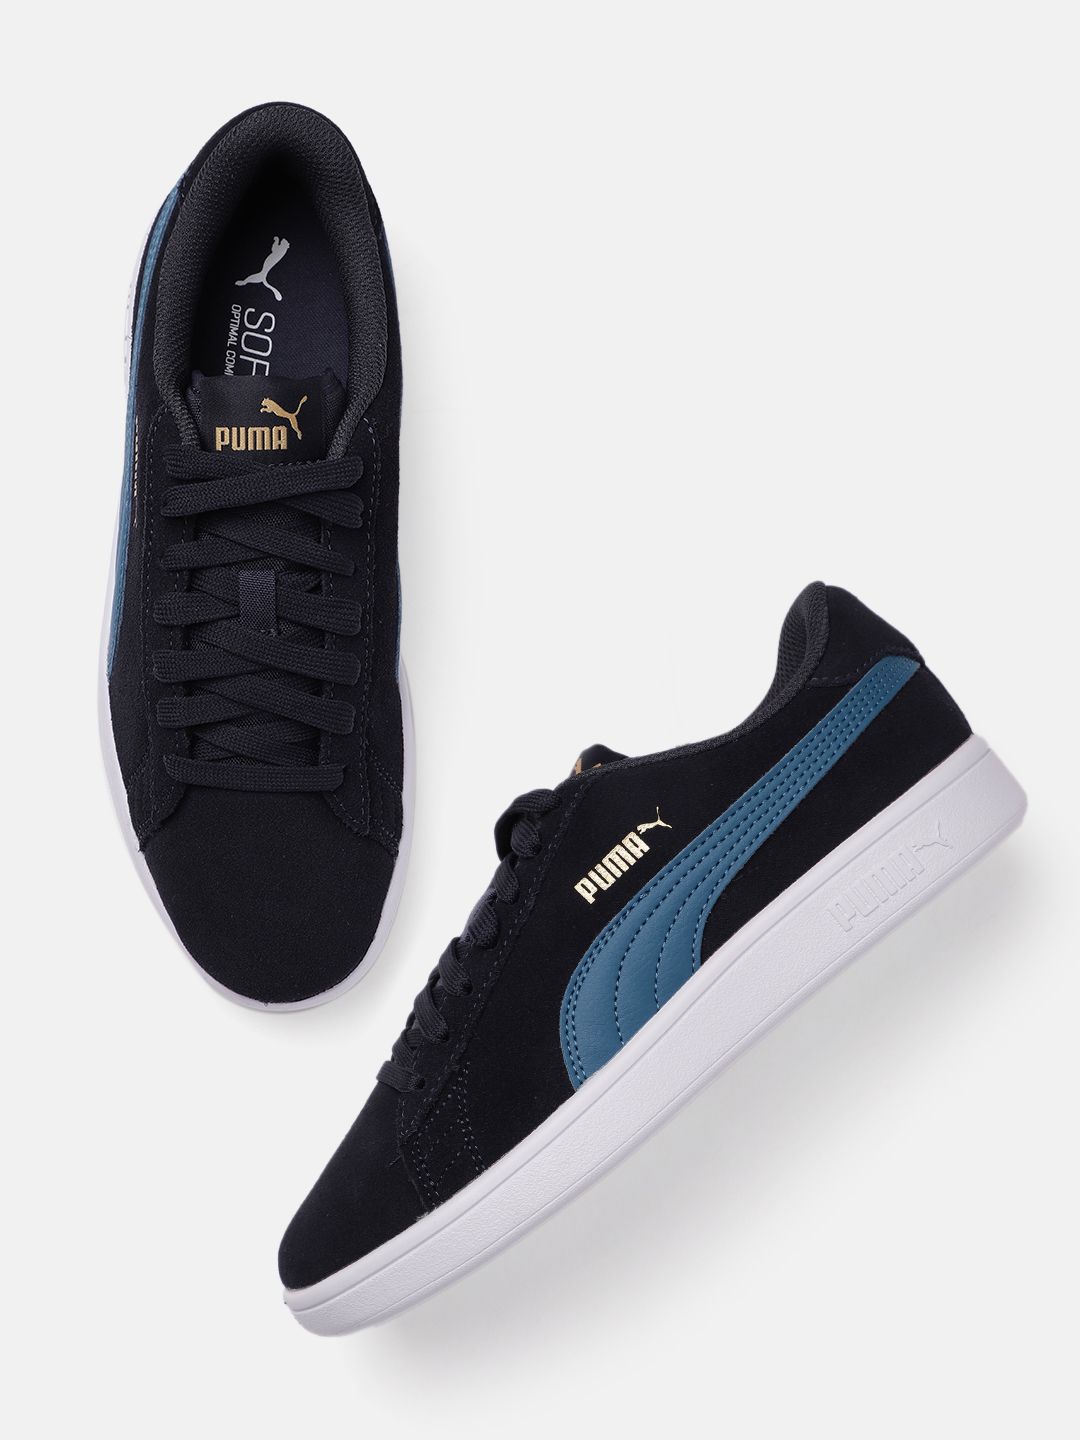 Puma Unisex Navy Blue Solid Leather Smash v2 Regular Sneakers Price in India